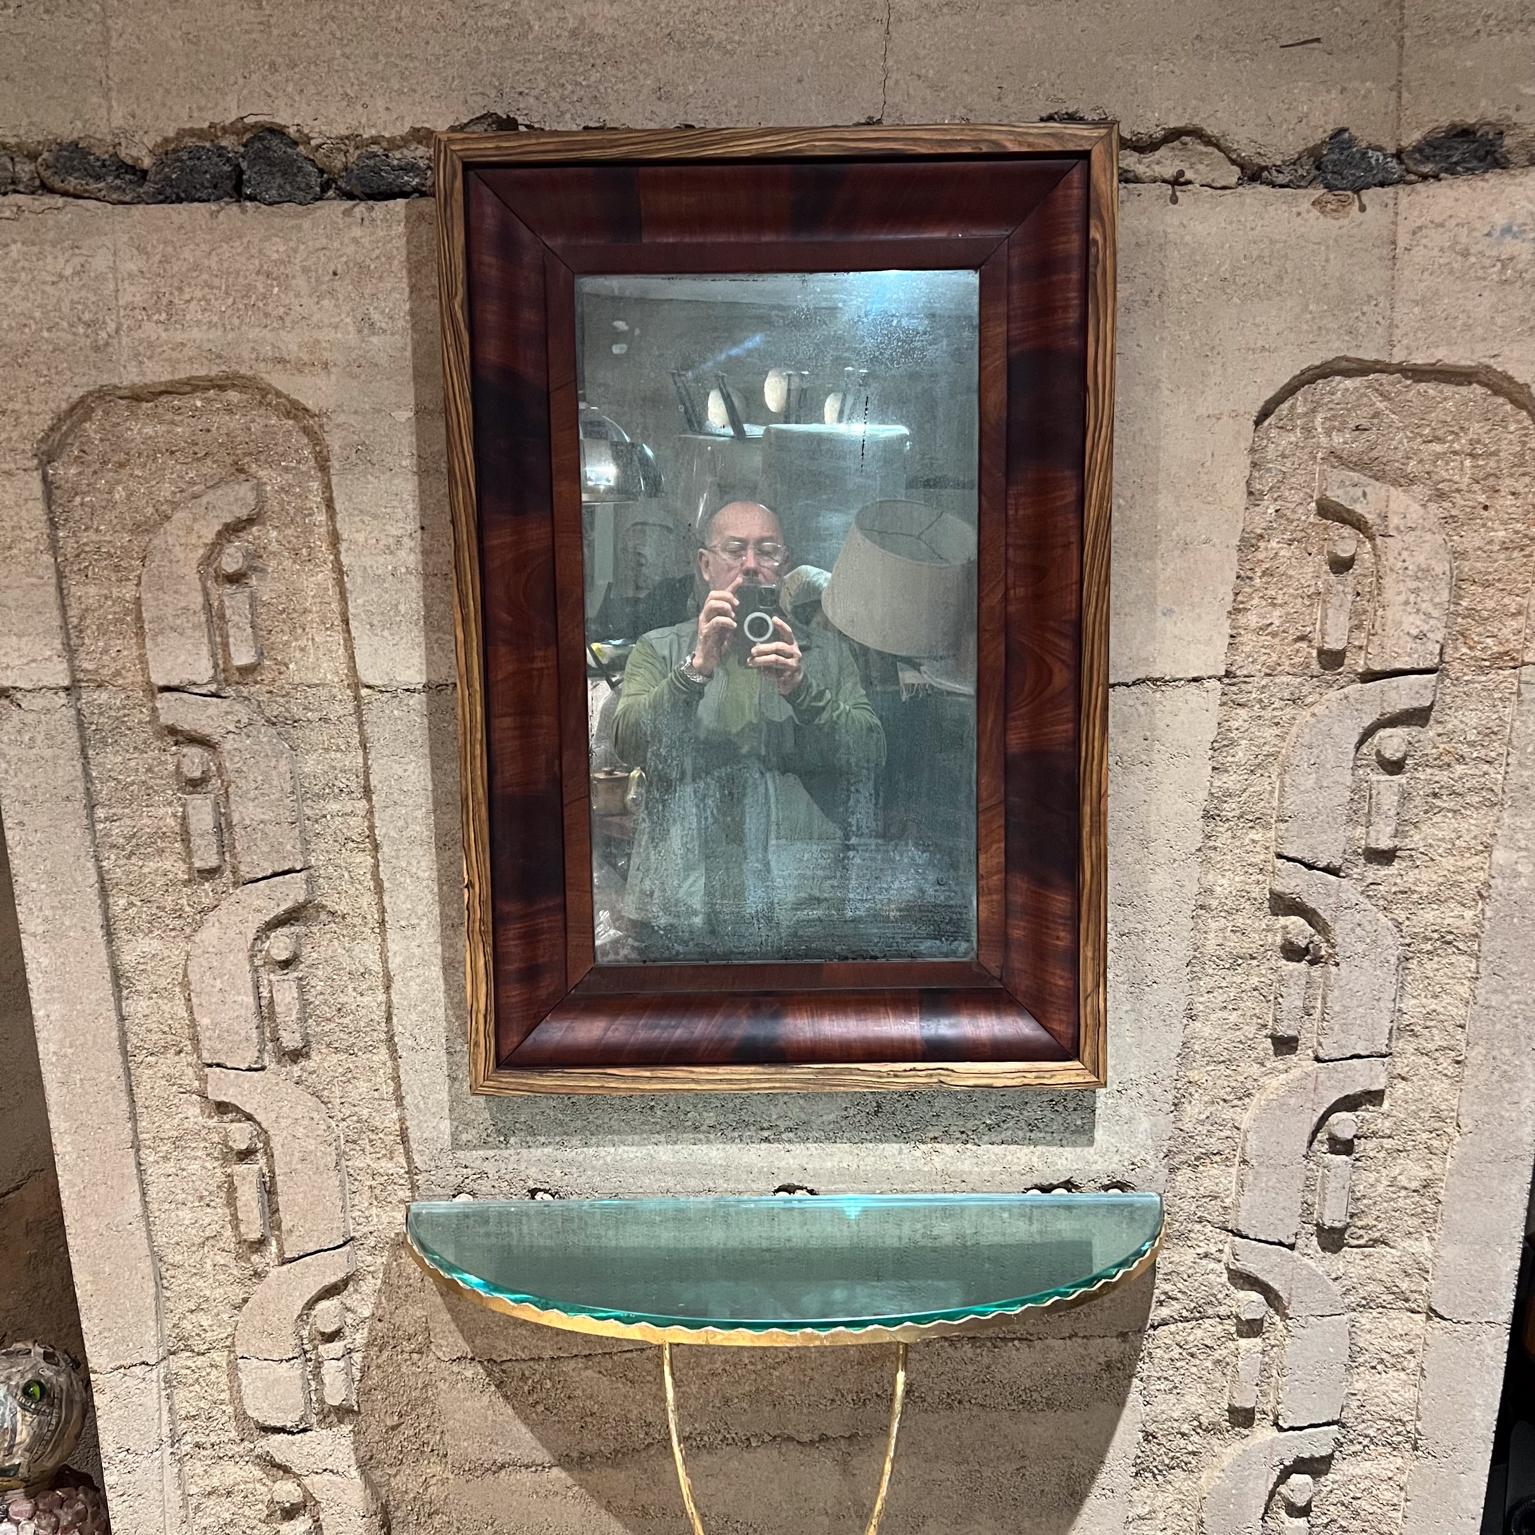 AMBIANIC presents
1930s Antique Art Deco Walnut and Zebra Wood Wall Mirror
Vintage Patina and Oxidation Present. Expect vintage wear and use.
35.25 h x 24 w x 1.75 d
Upgraded wood frame.
Original preowned vintage condition.
Refer to Images.
LA OC PS